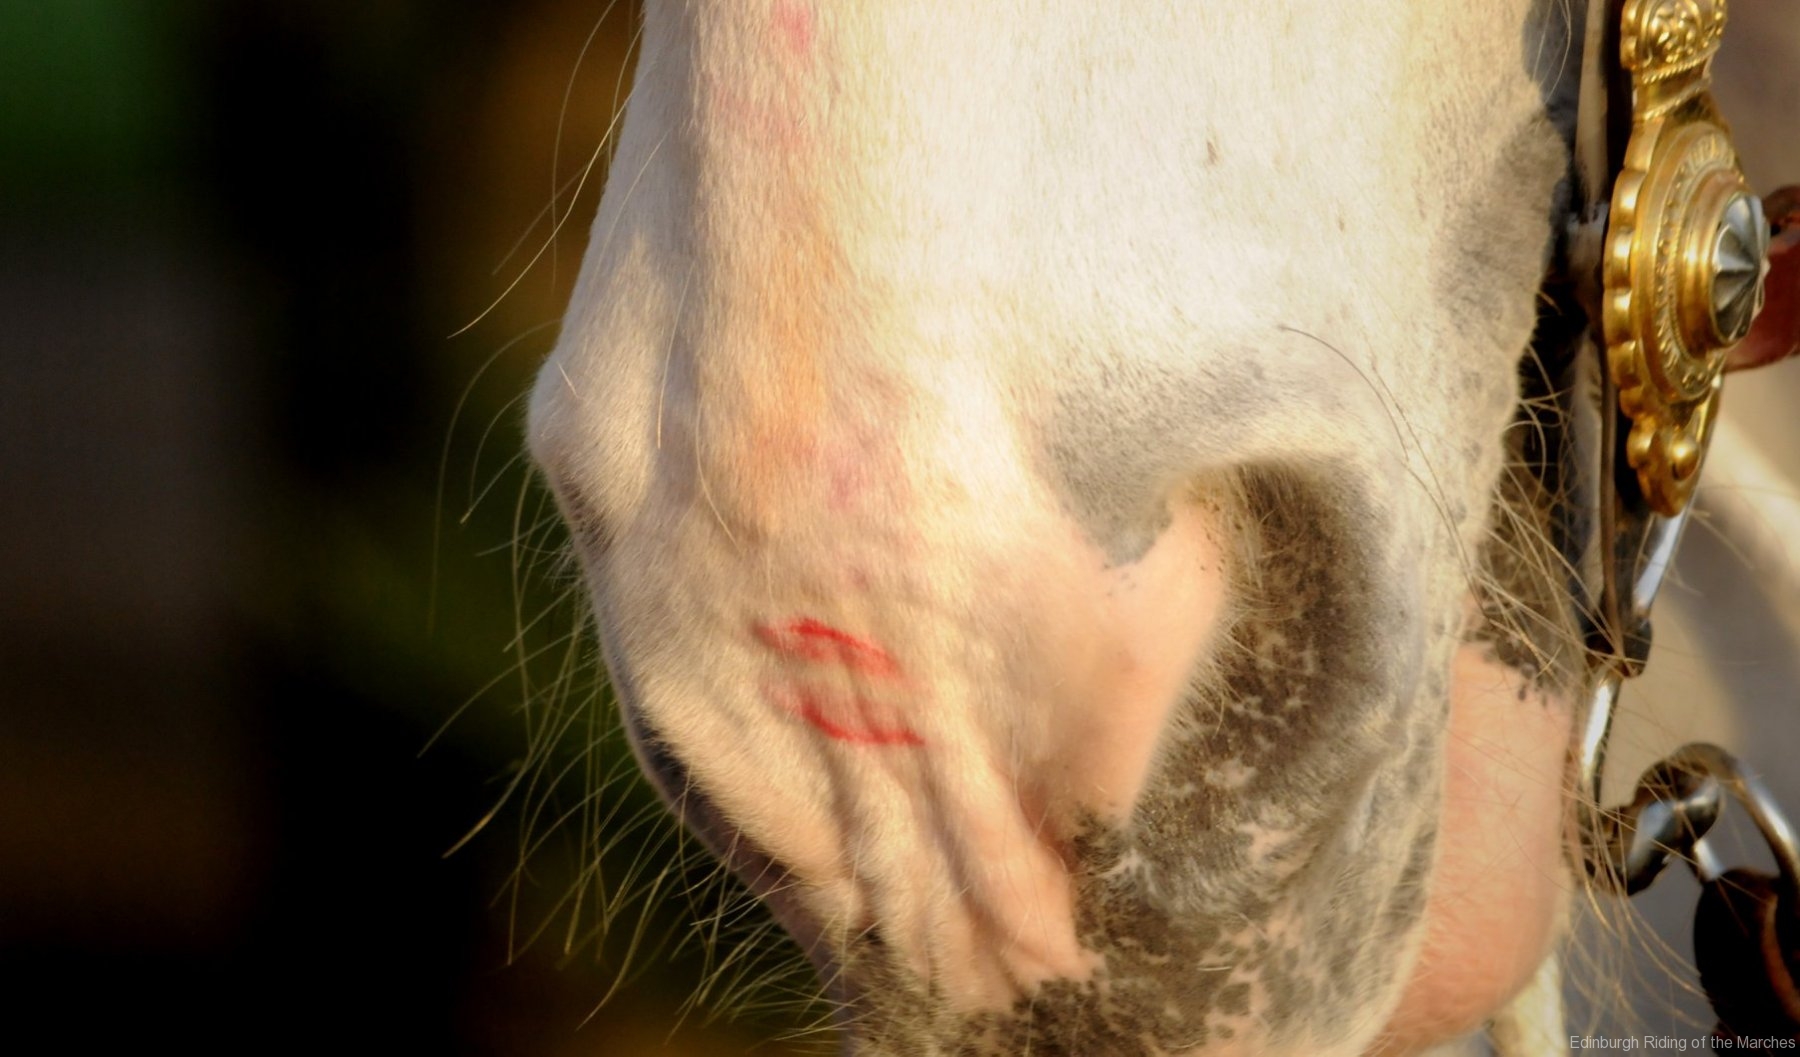 Horse with a lipstick kiss